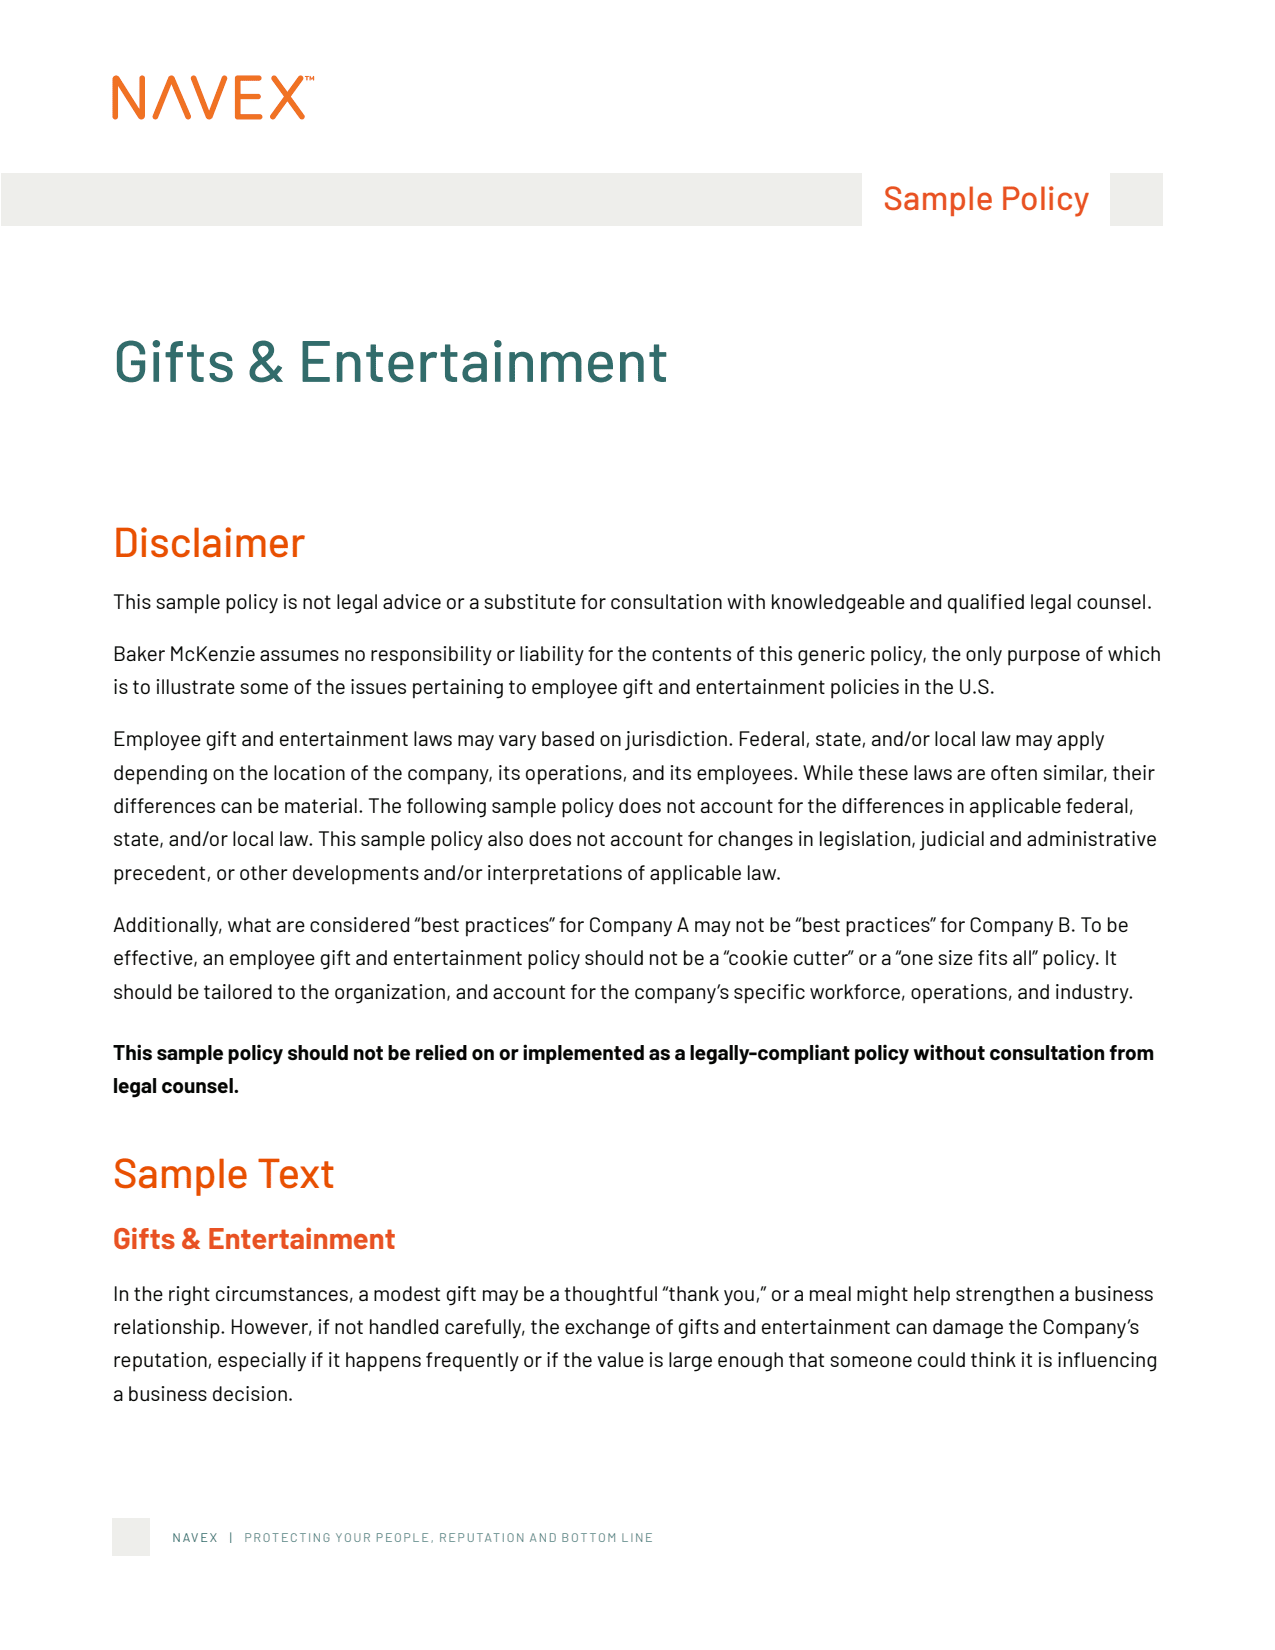 Gifts & Entertainment Sample Policy